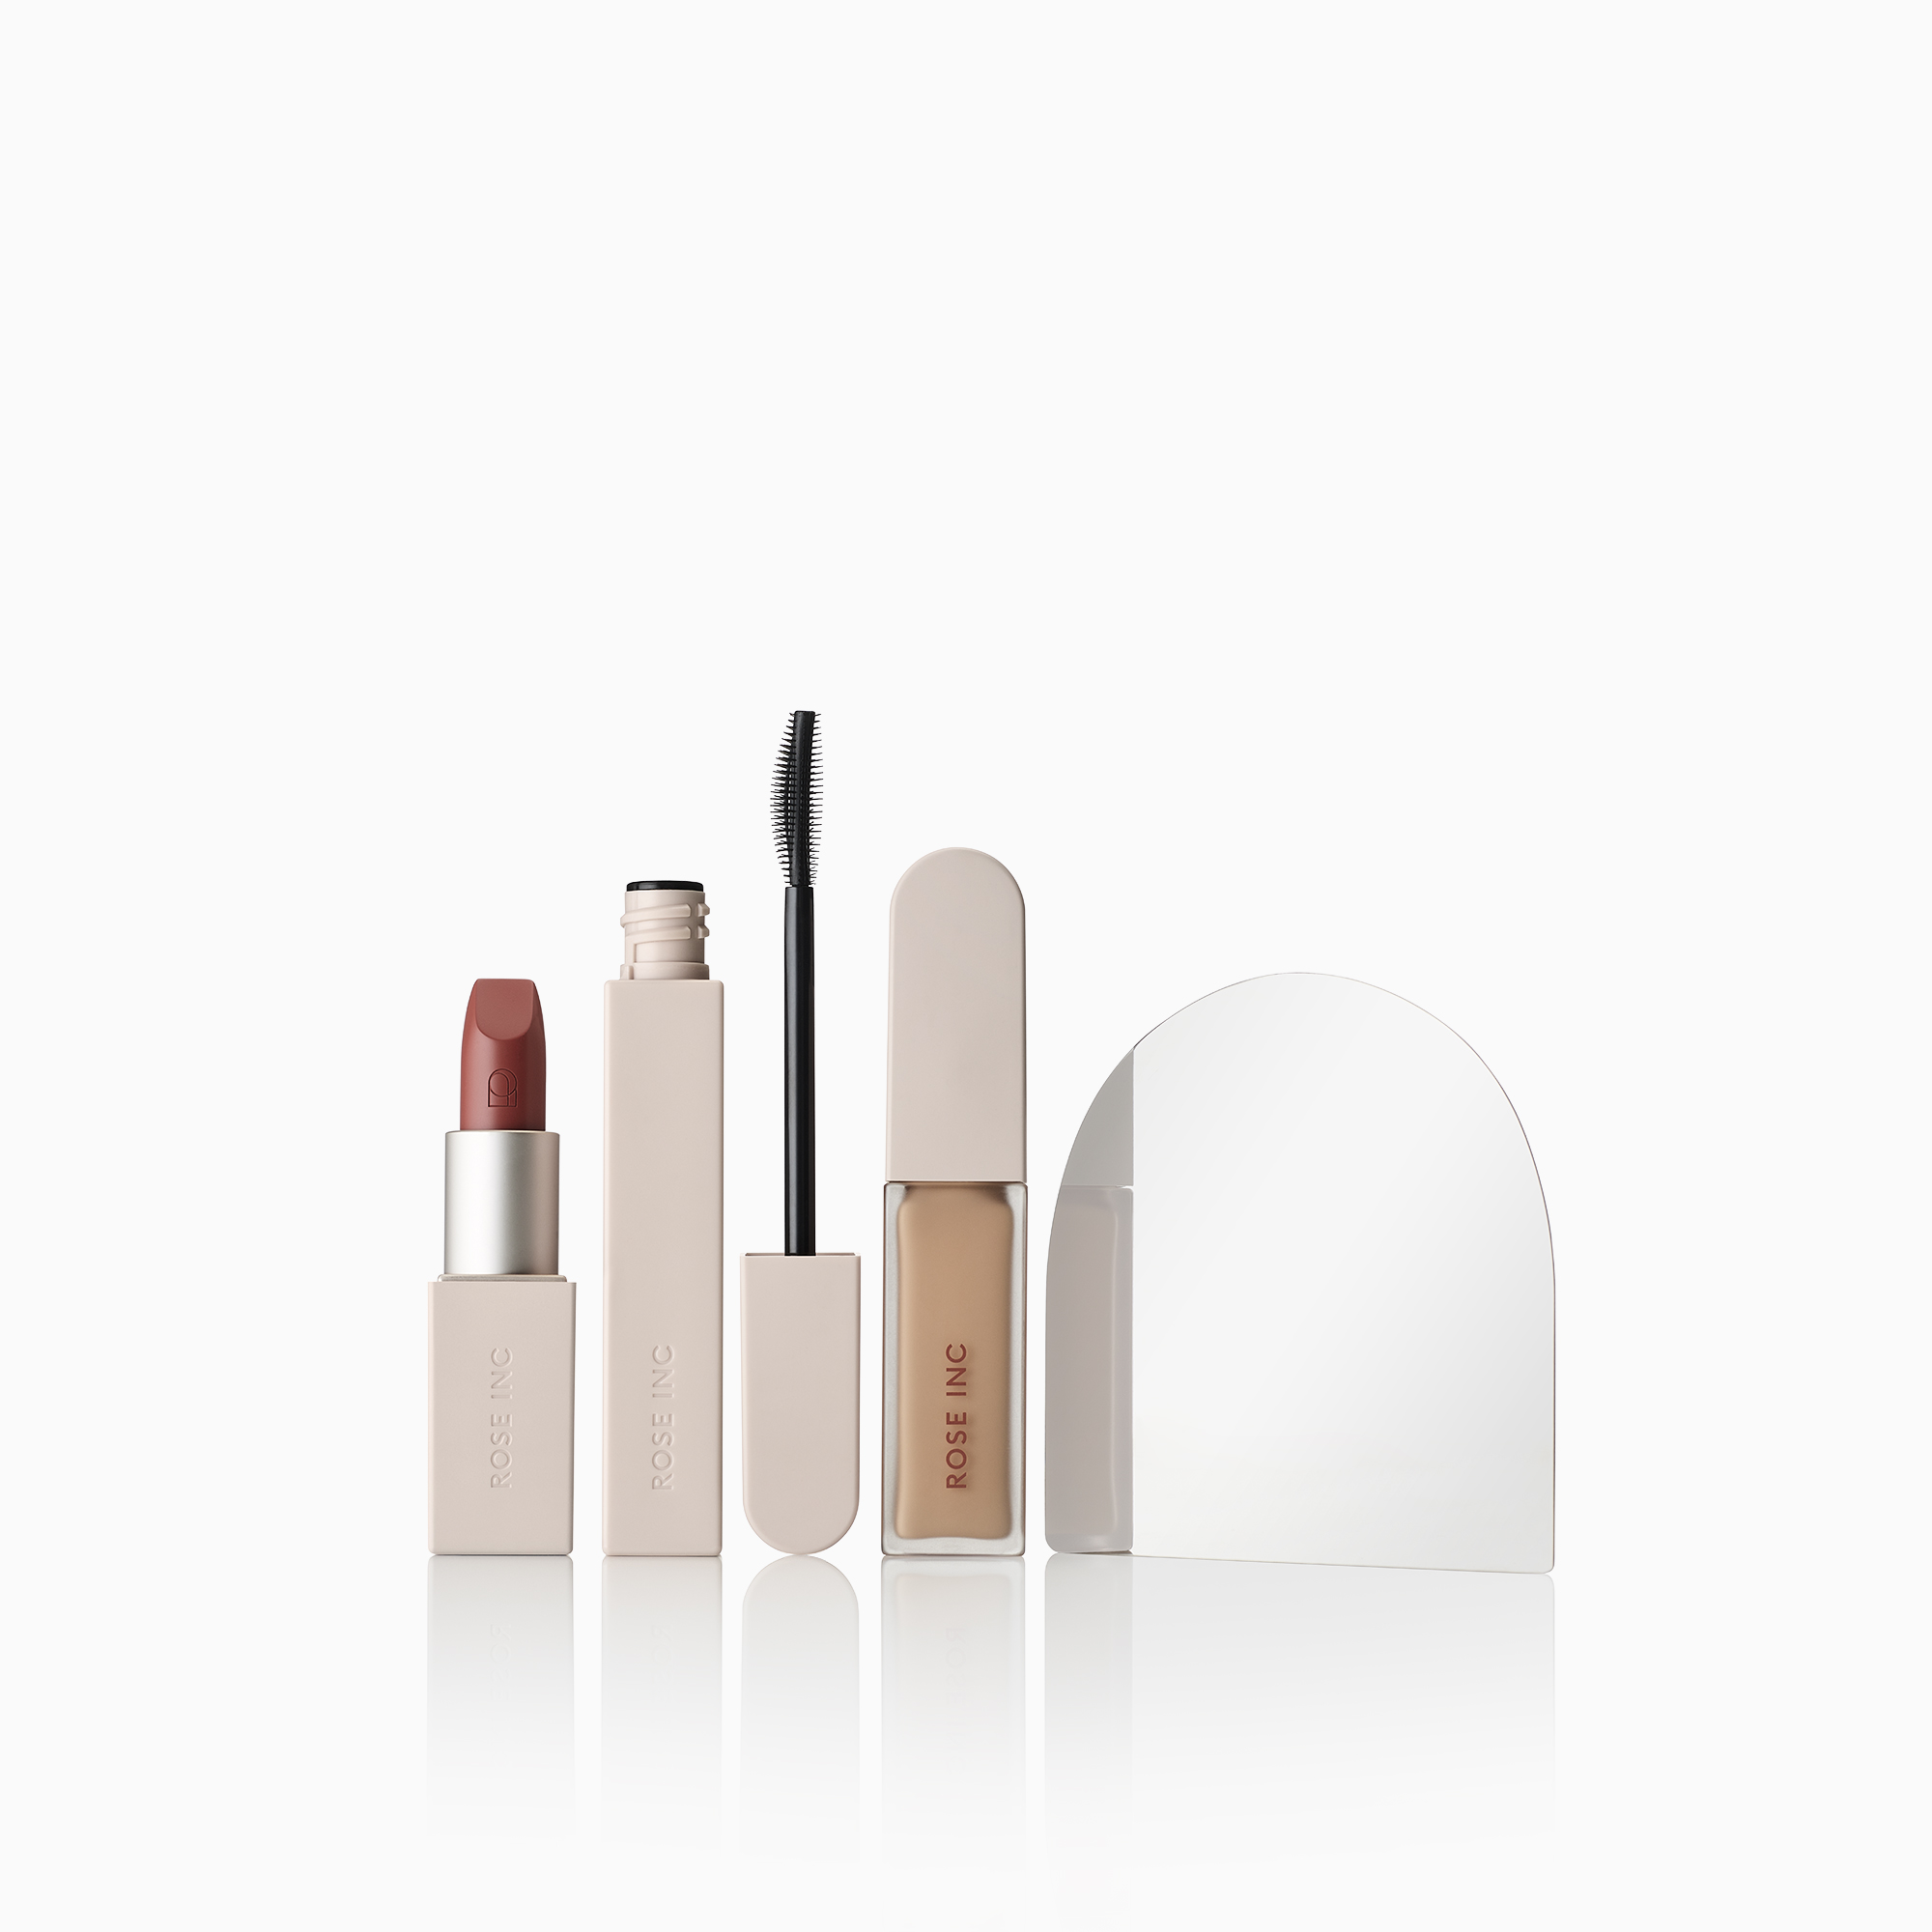 Rose Inc dot come exclusive Holiday Favorites Color Set. Choose your own shade of satin Lipstick and Softlight Concealer, plus a full size Mascara and a mini makeup mirror. 